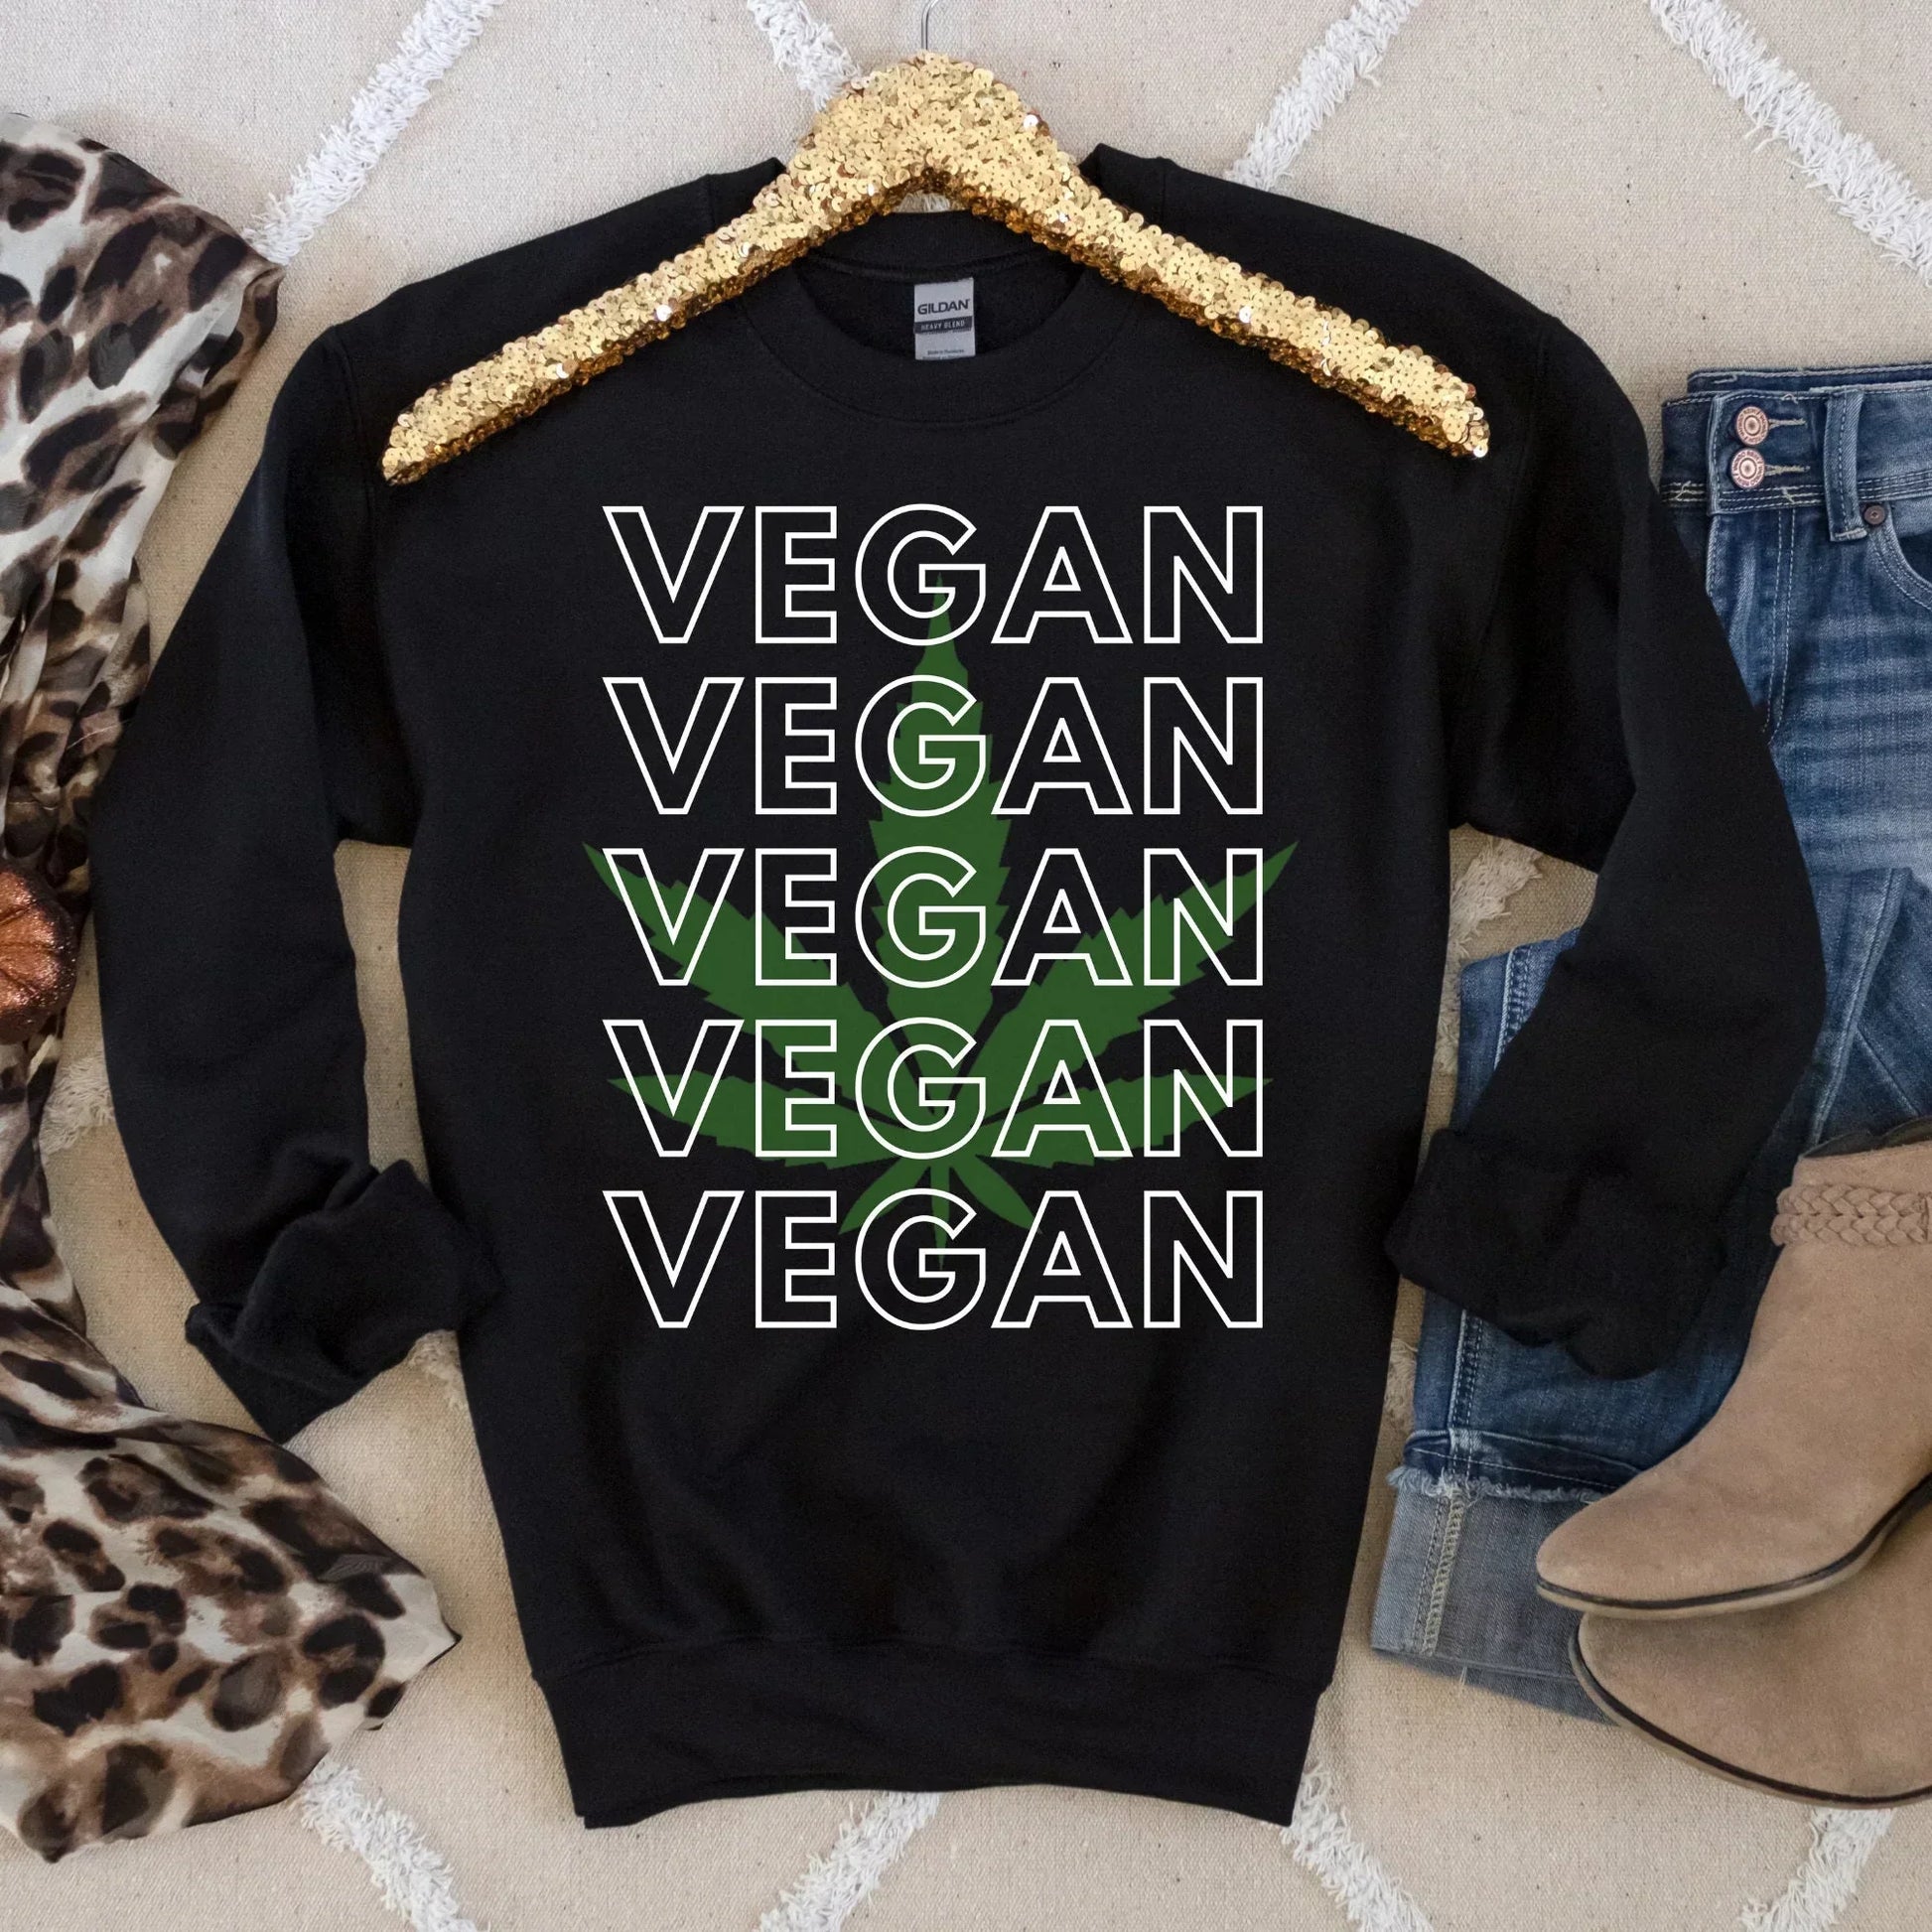 Vegan Shirt, Hippie Clothes, Stoner Gifts, Weed Gifts, Weed Shirt, Stoner Girl, Stoner Gift for Him, Stoner Gift for Her, Marijuana T shirts